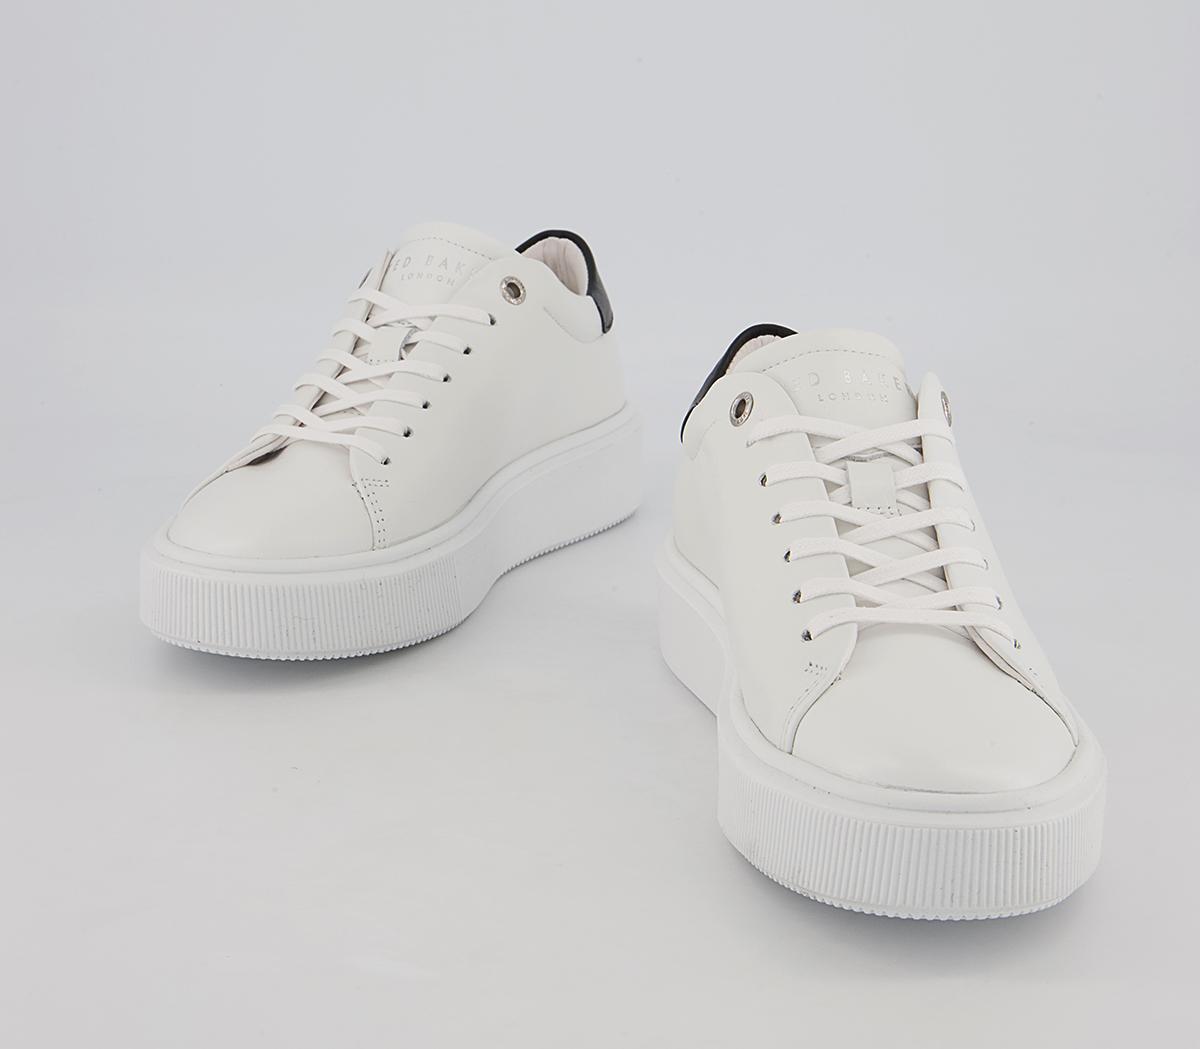 Ted Baker Lornea Trainers White Black - Fashion Trainers